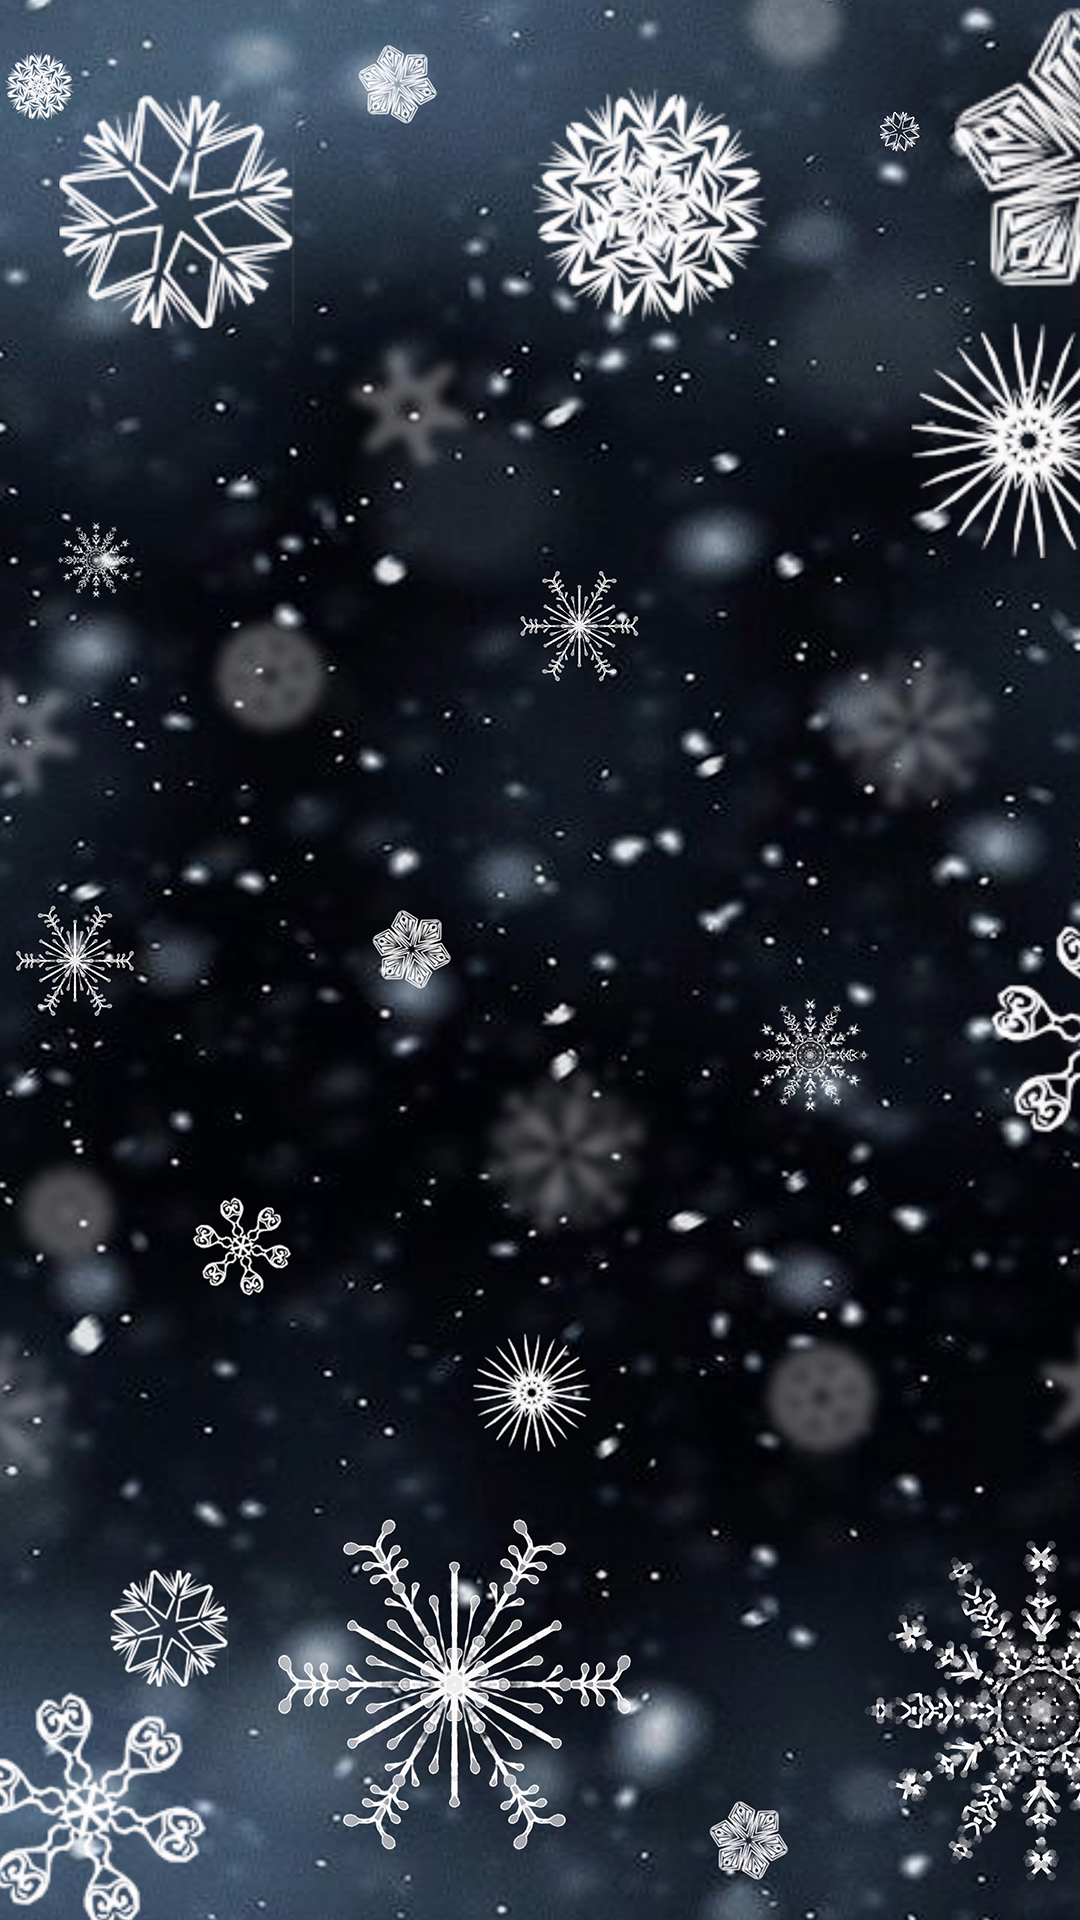 1080x1920 Snowflakes Wallpaper for Phone